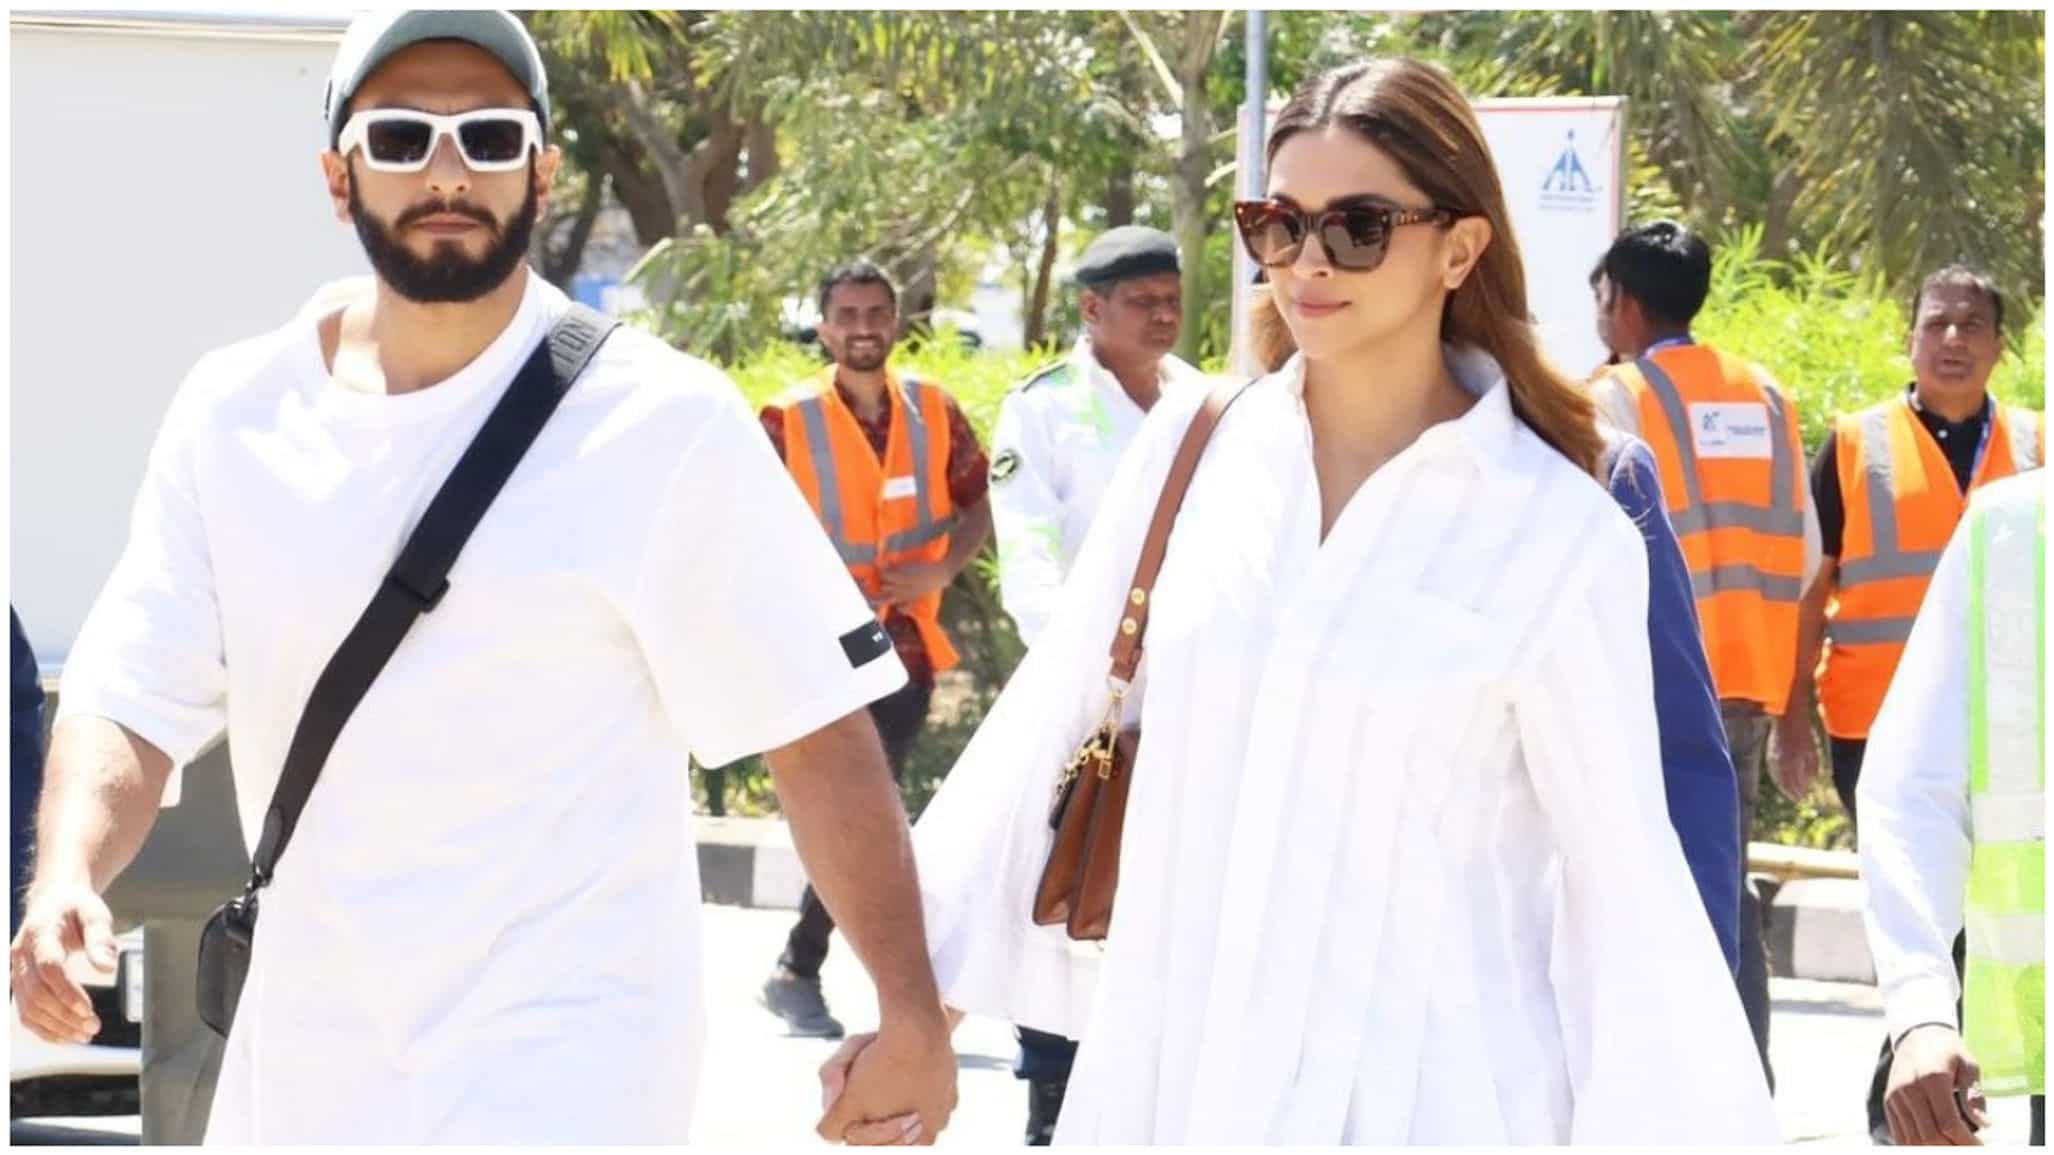 https://www.mobilemasala.com/film-gossip/Pregnant-Deepika-Padukone-Ranveer-Singh-hold-hands-and-don-similar-clothes-as-they-jet-off-from-Jamnagar-i220889